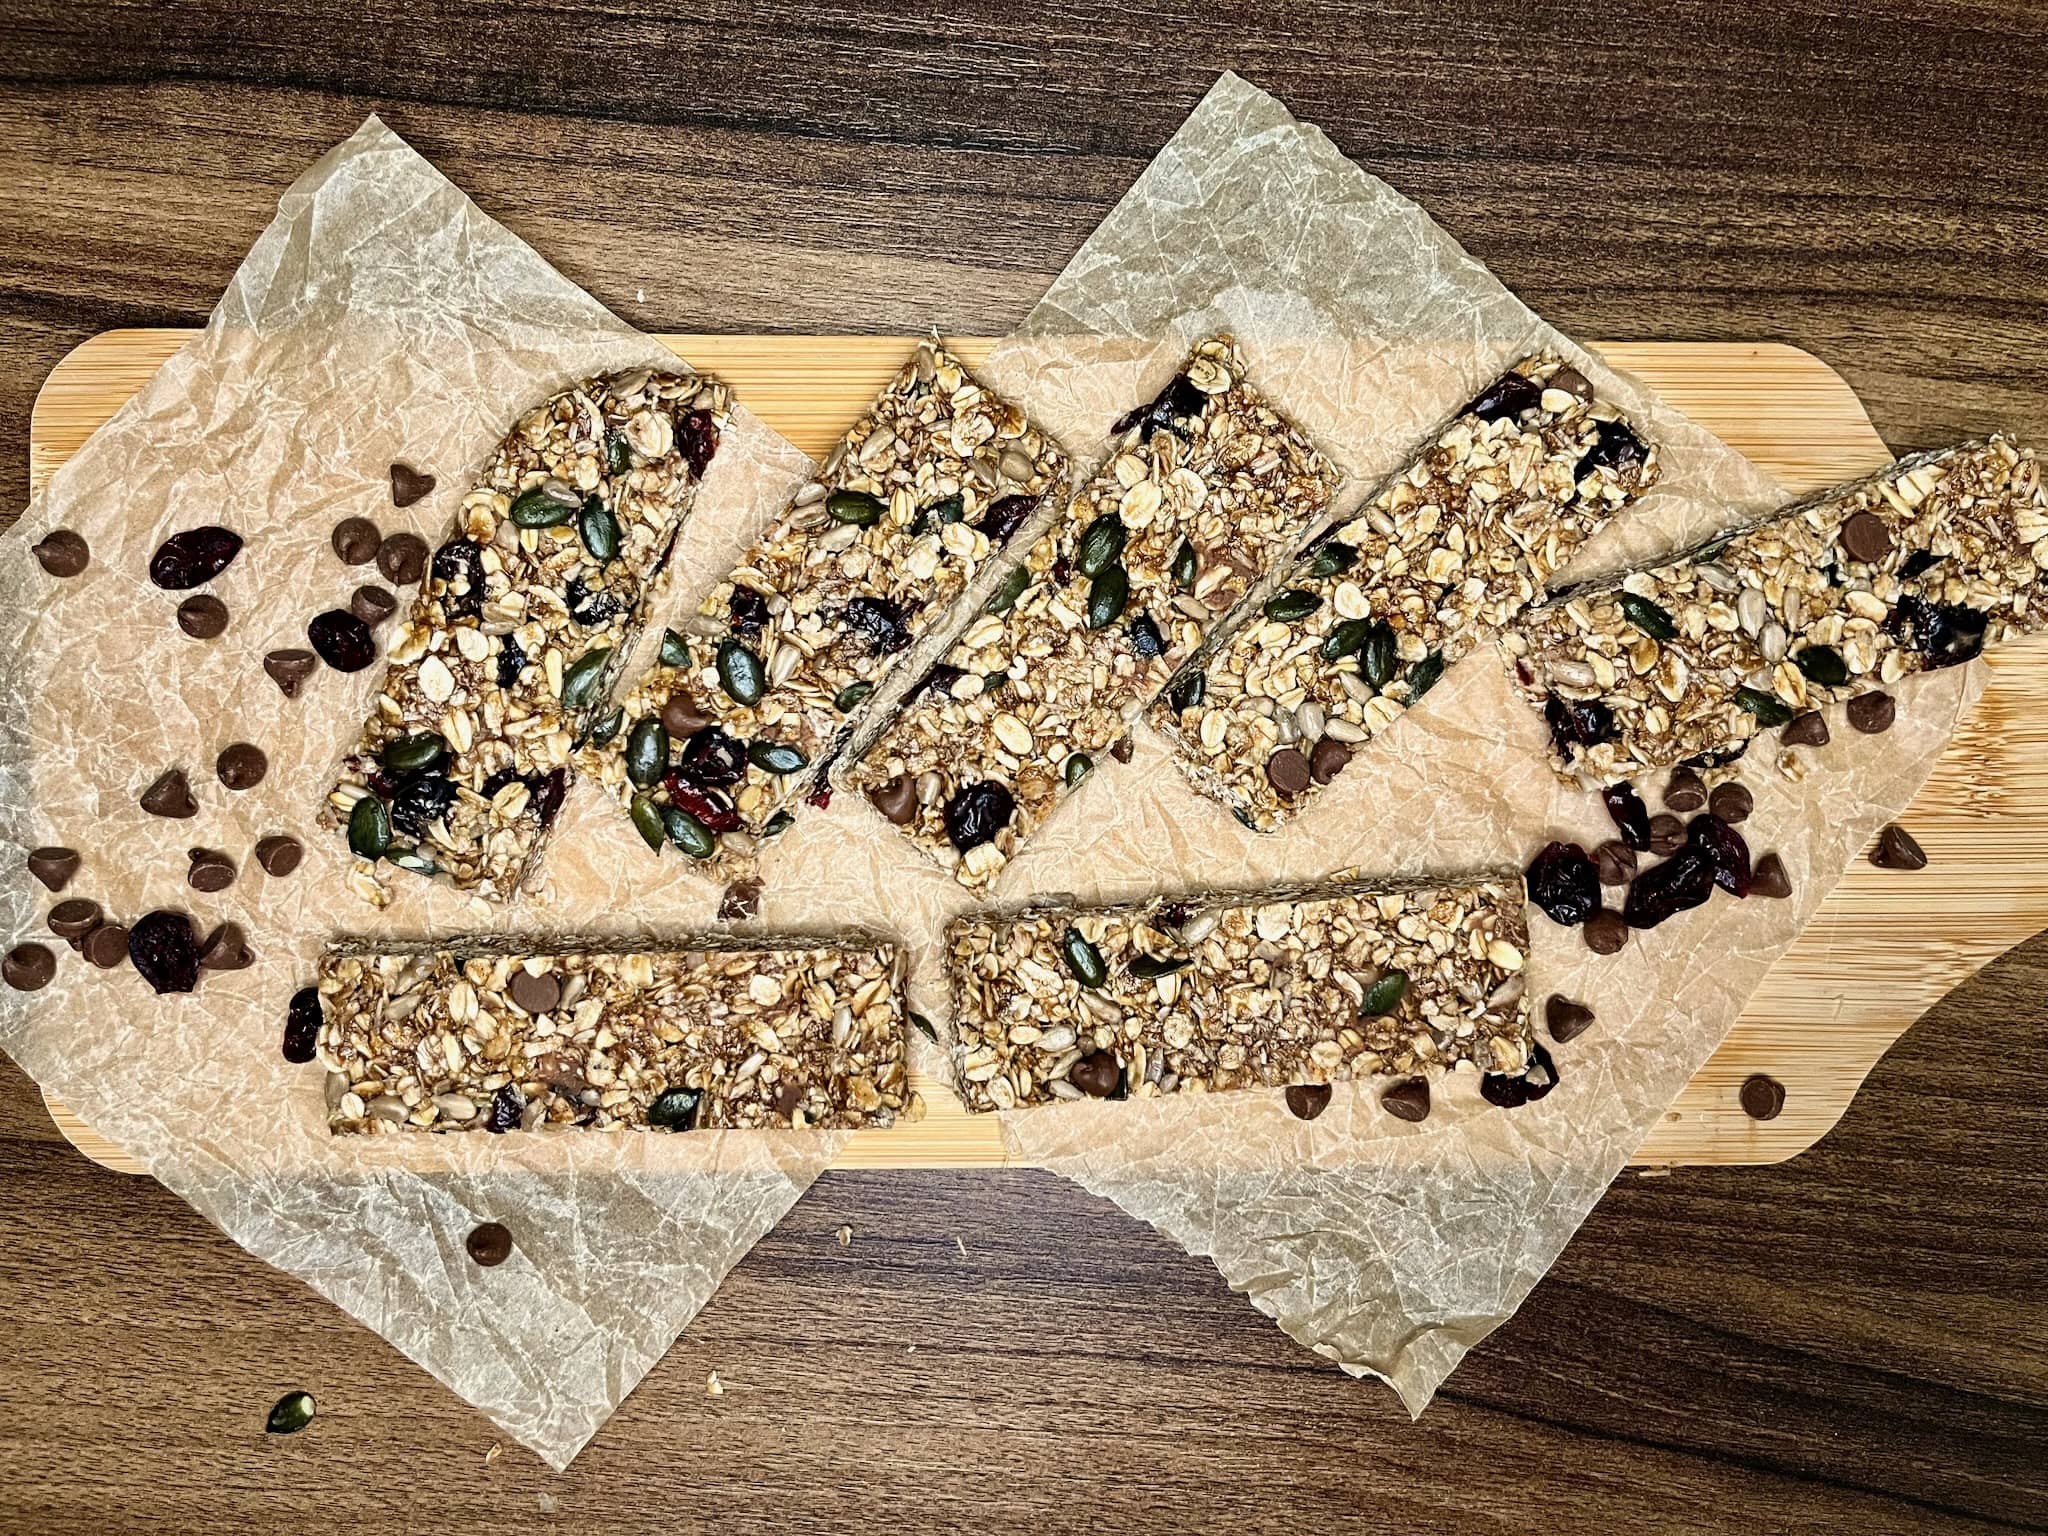 The muesli mixture has been chopped into bars on a chopping board